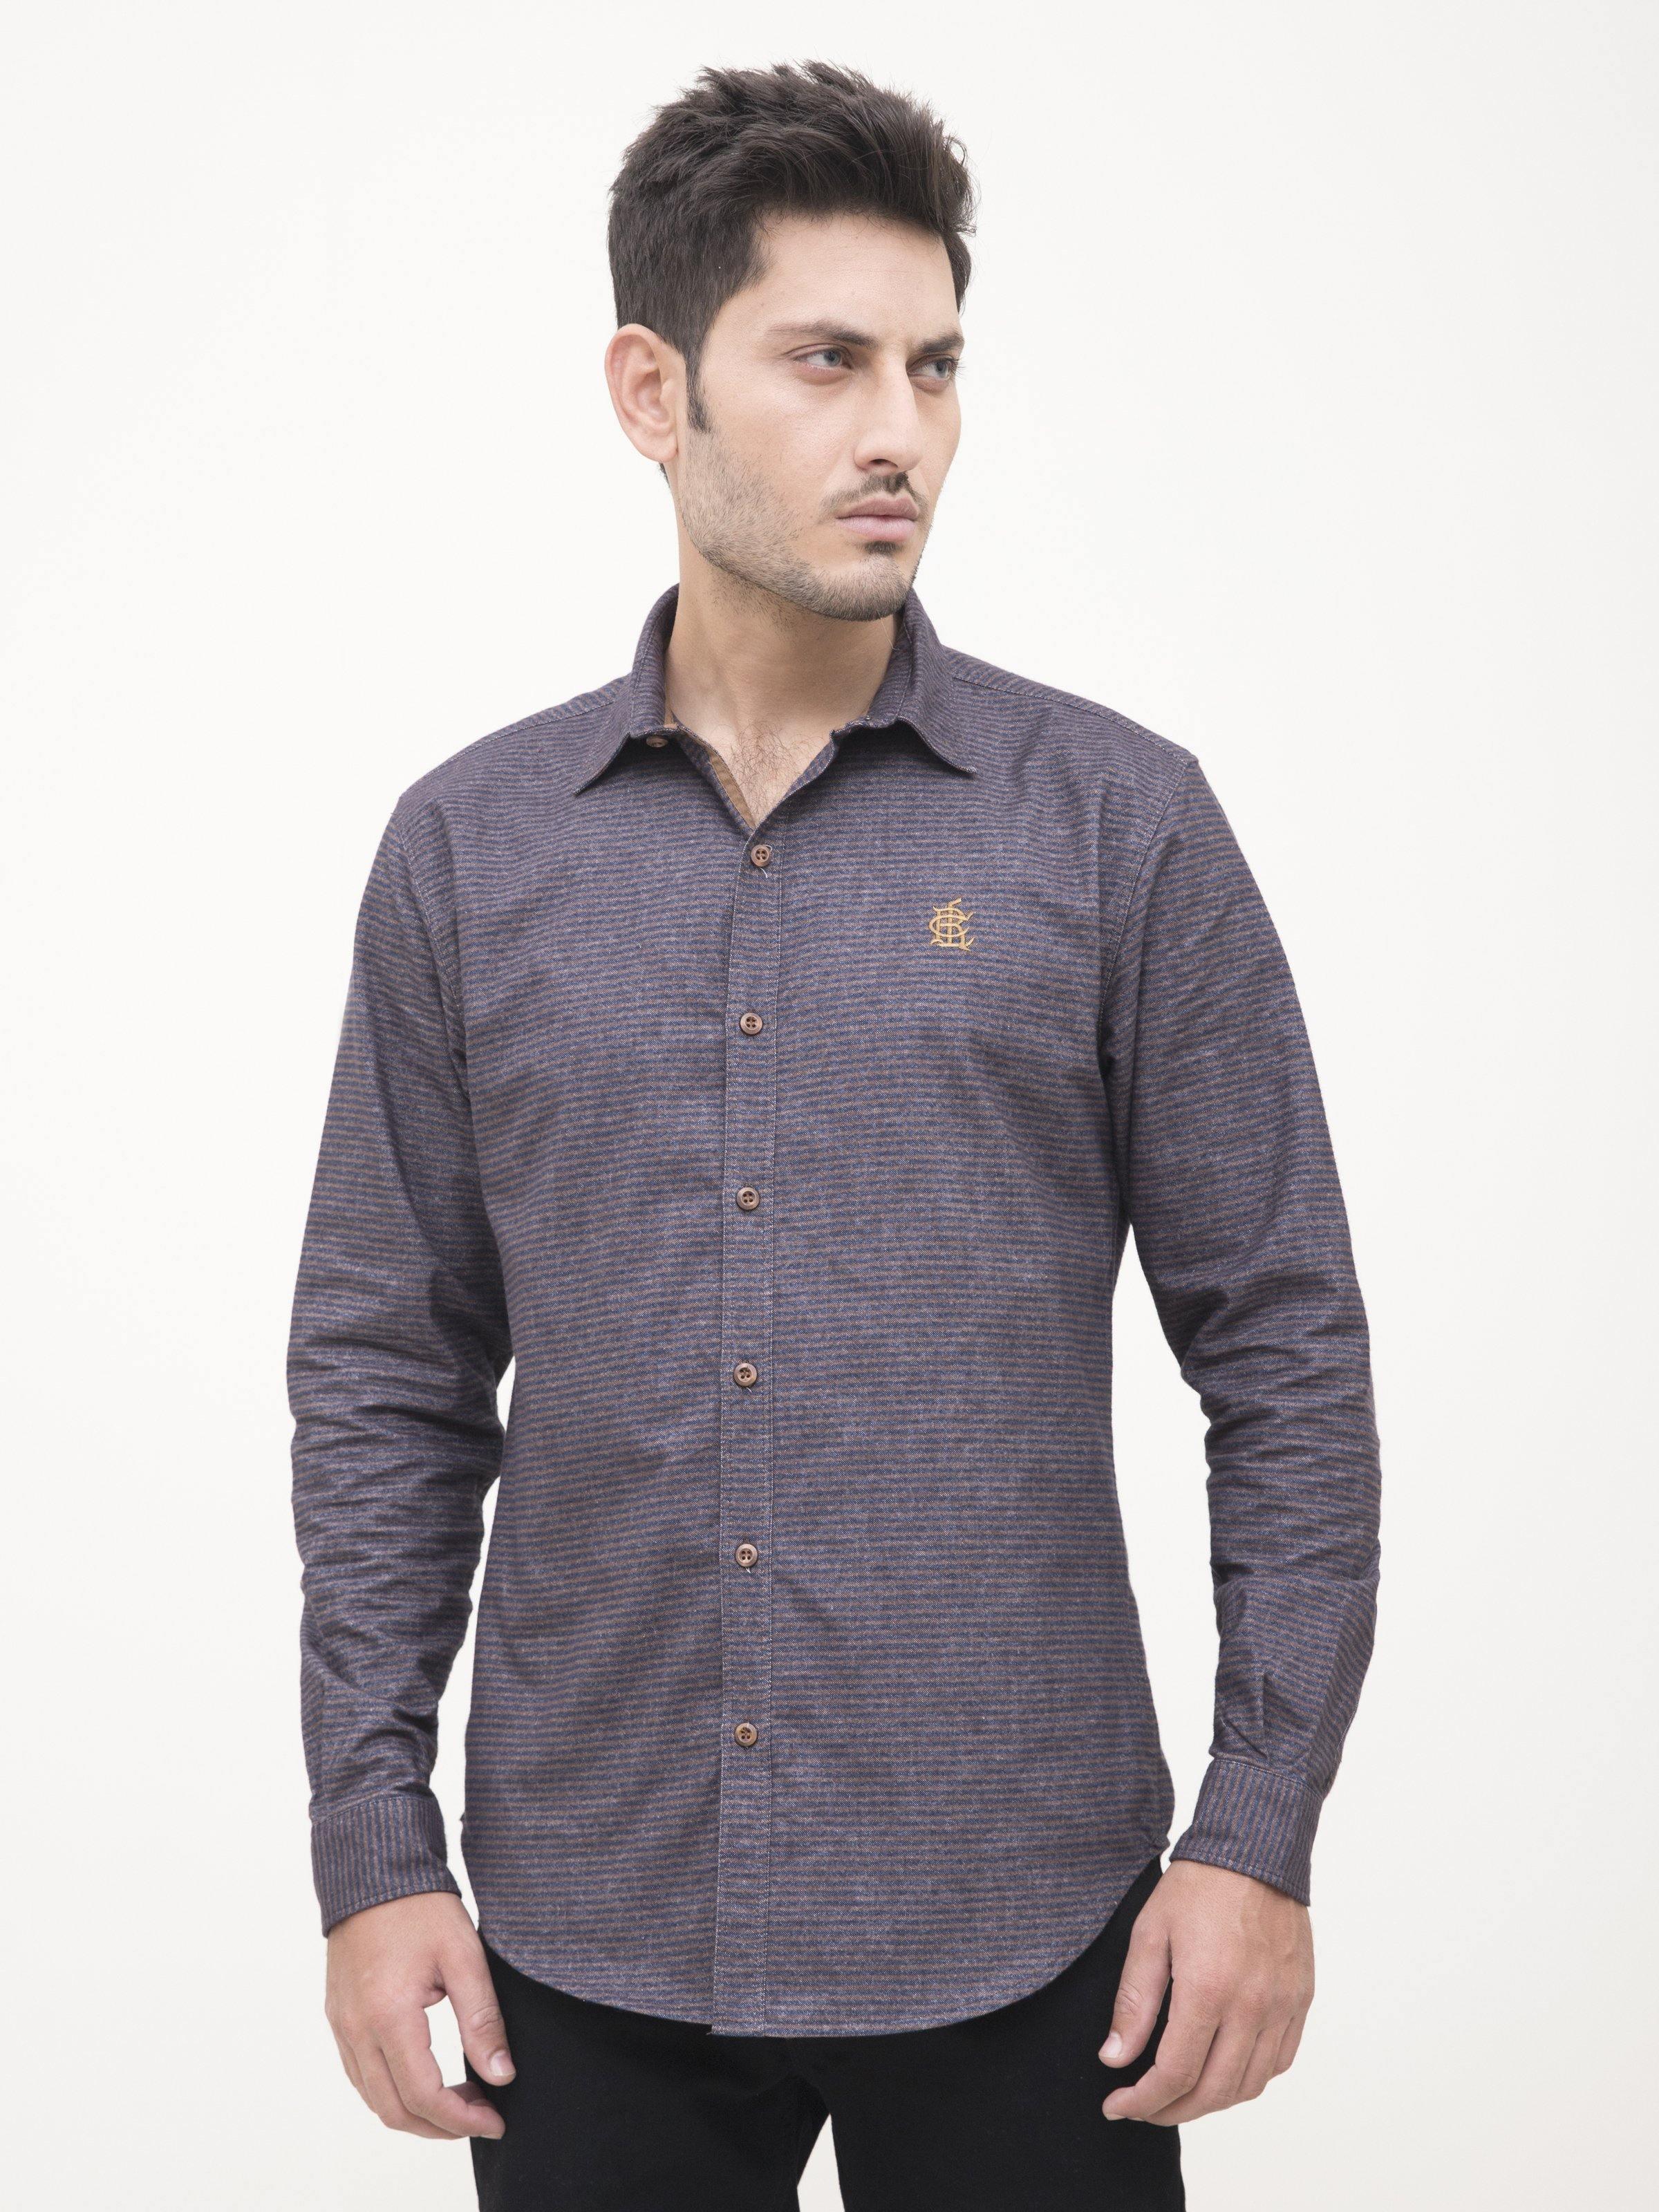 CASUAL SHIRT FULL SLEEVE BROWN BLUE at Charcoal Clothing